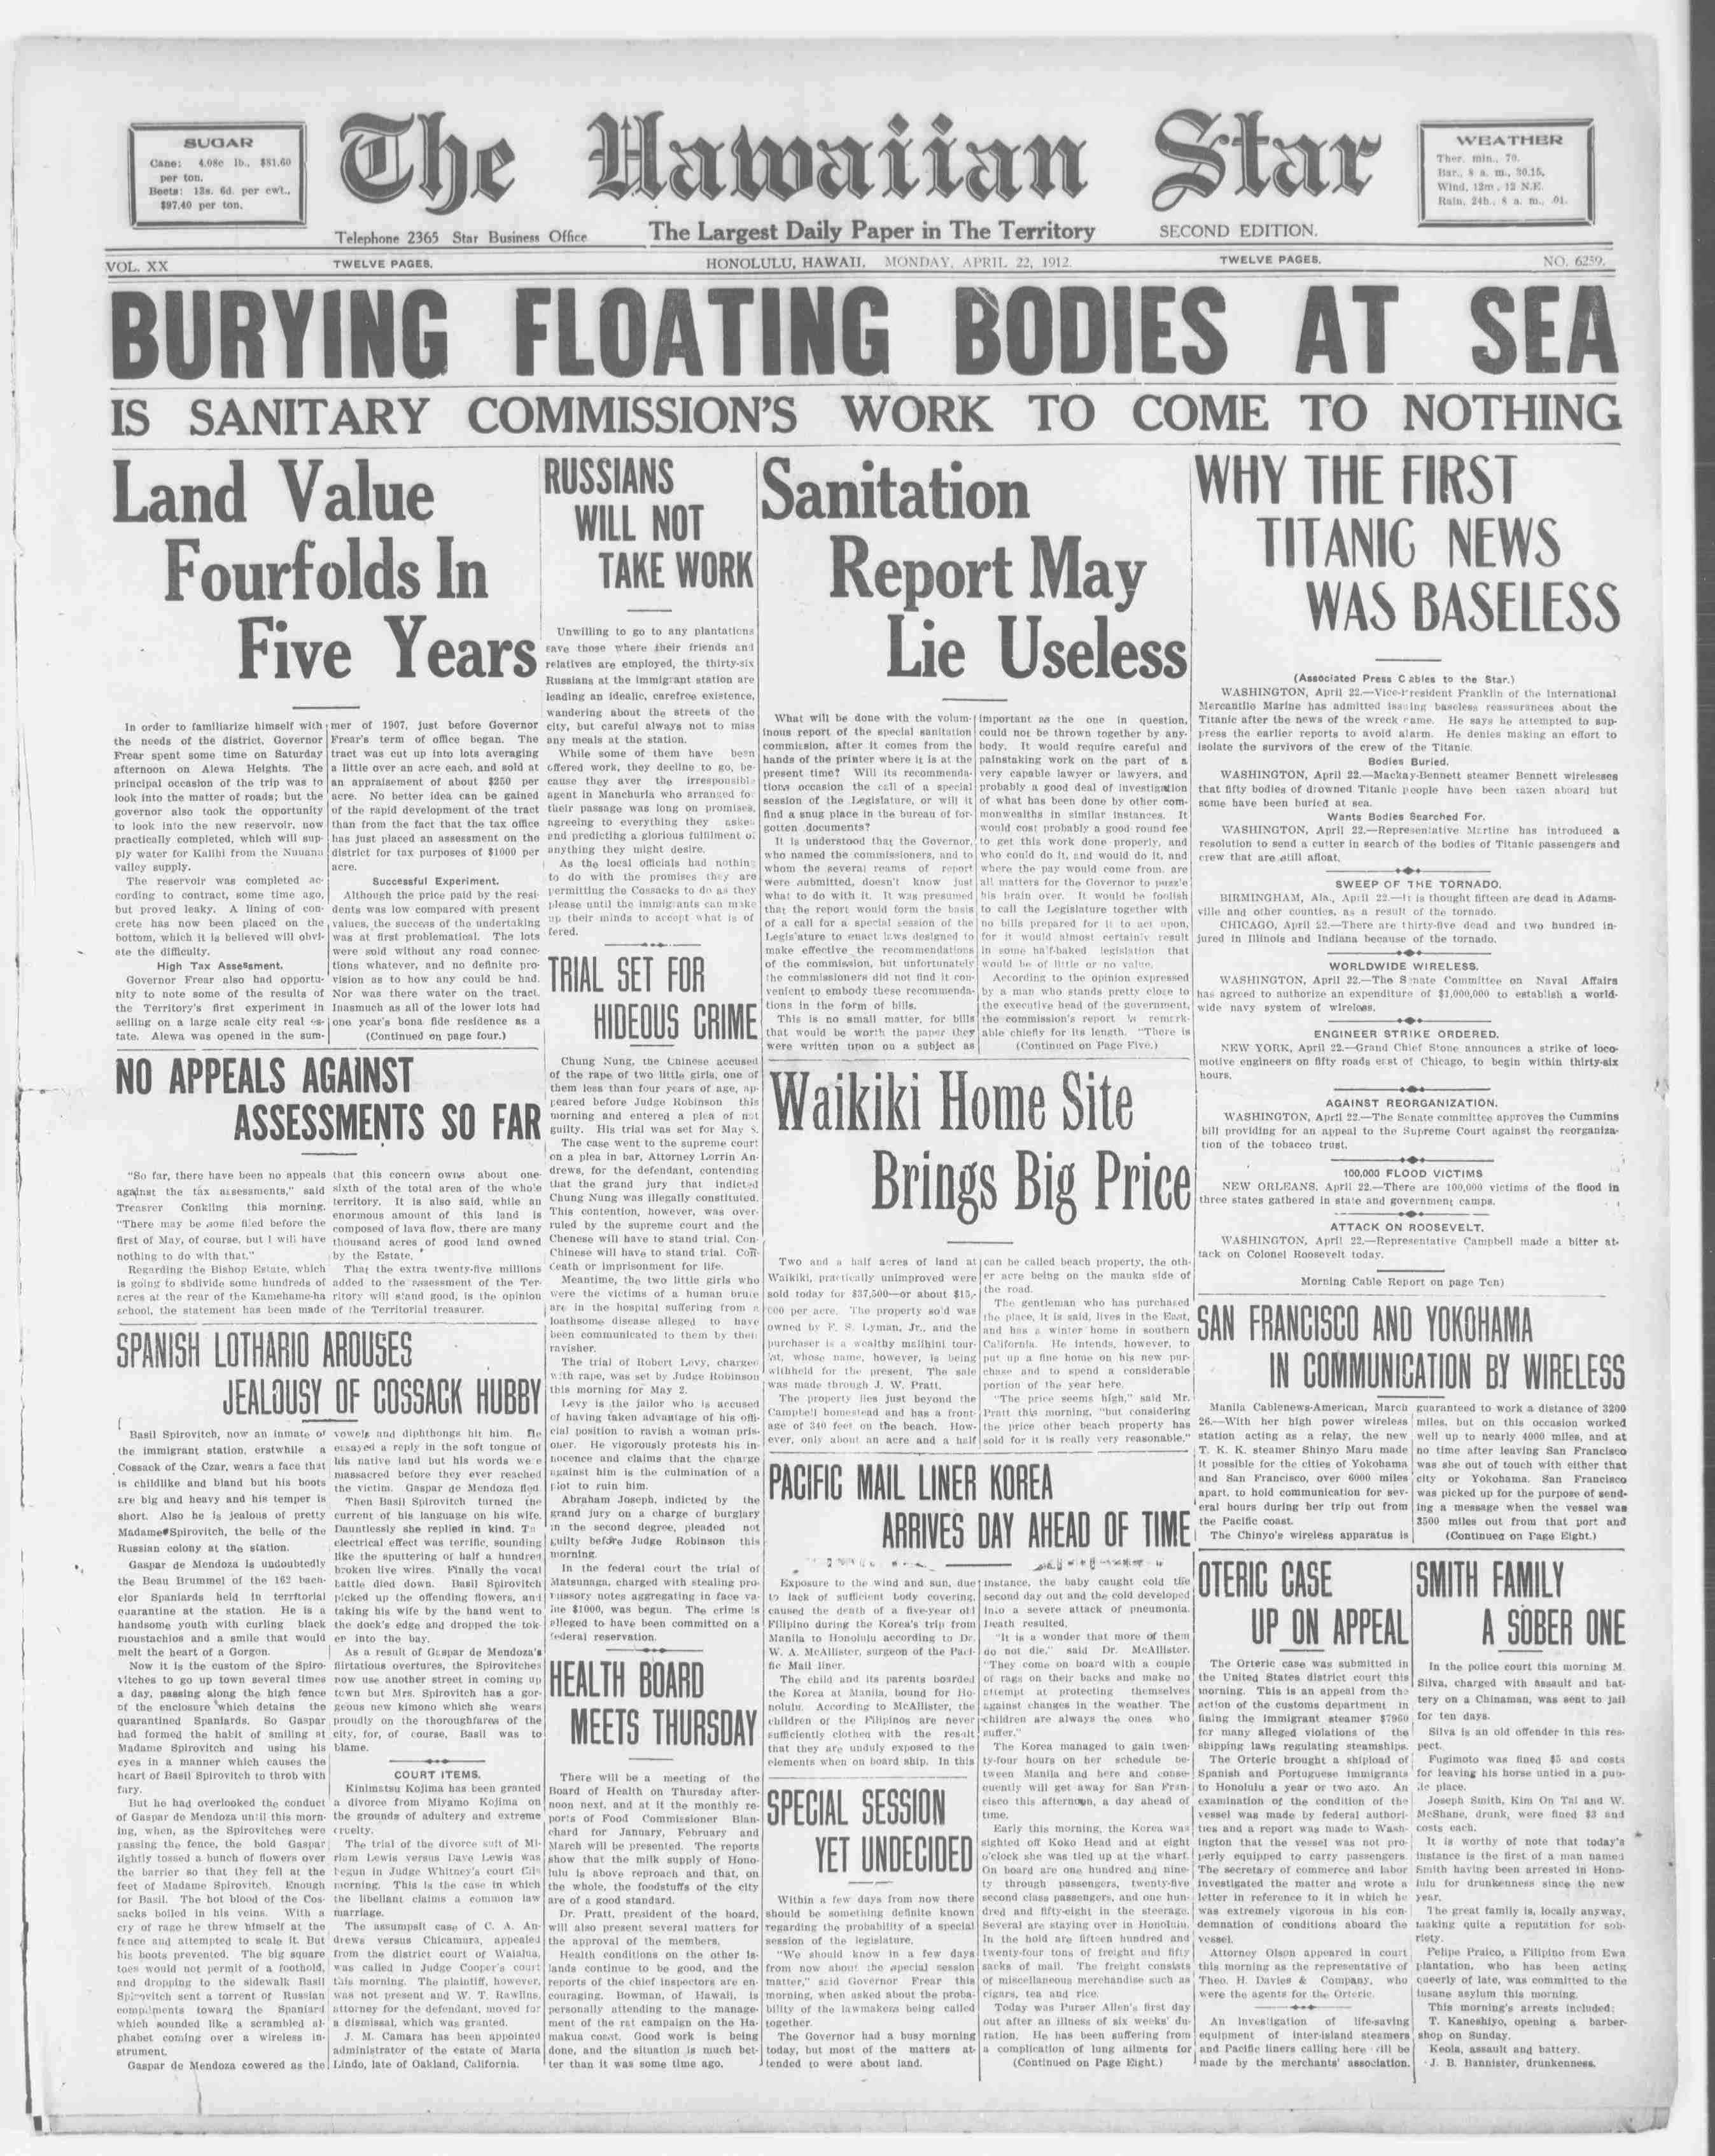 Titanic Newspaper Front Page 1912-04-22 The Hawaiian Star (Honolulu, HI), April 22, 1912, SECOND EDITION, Page 1